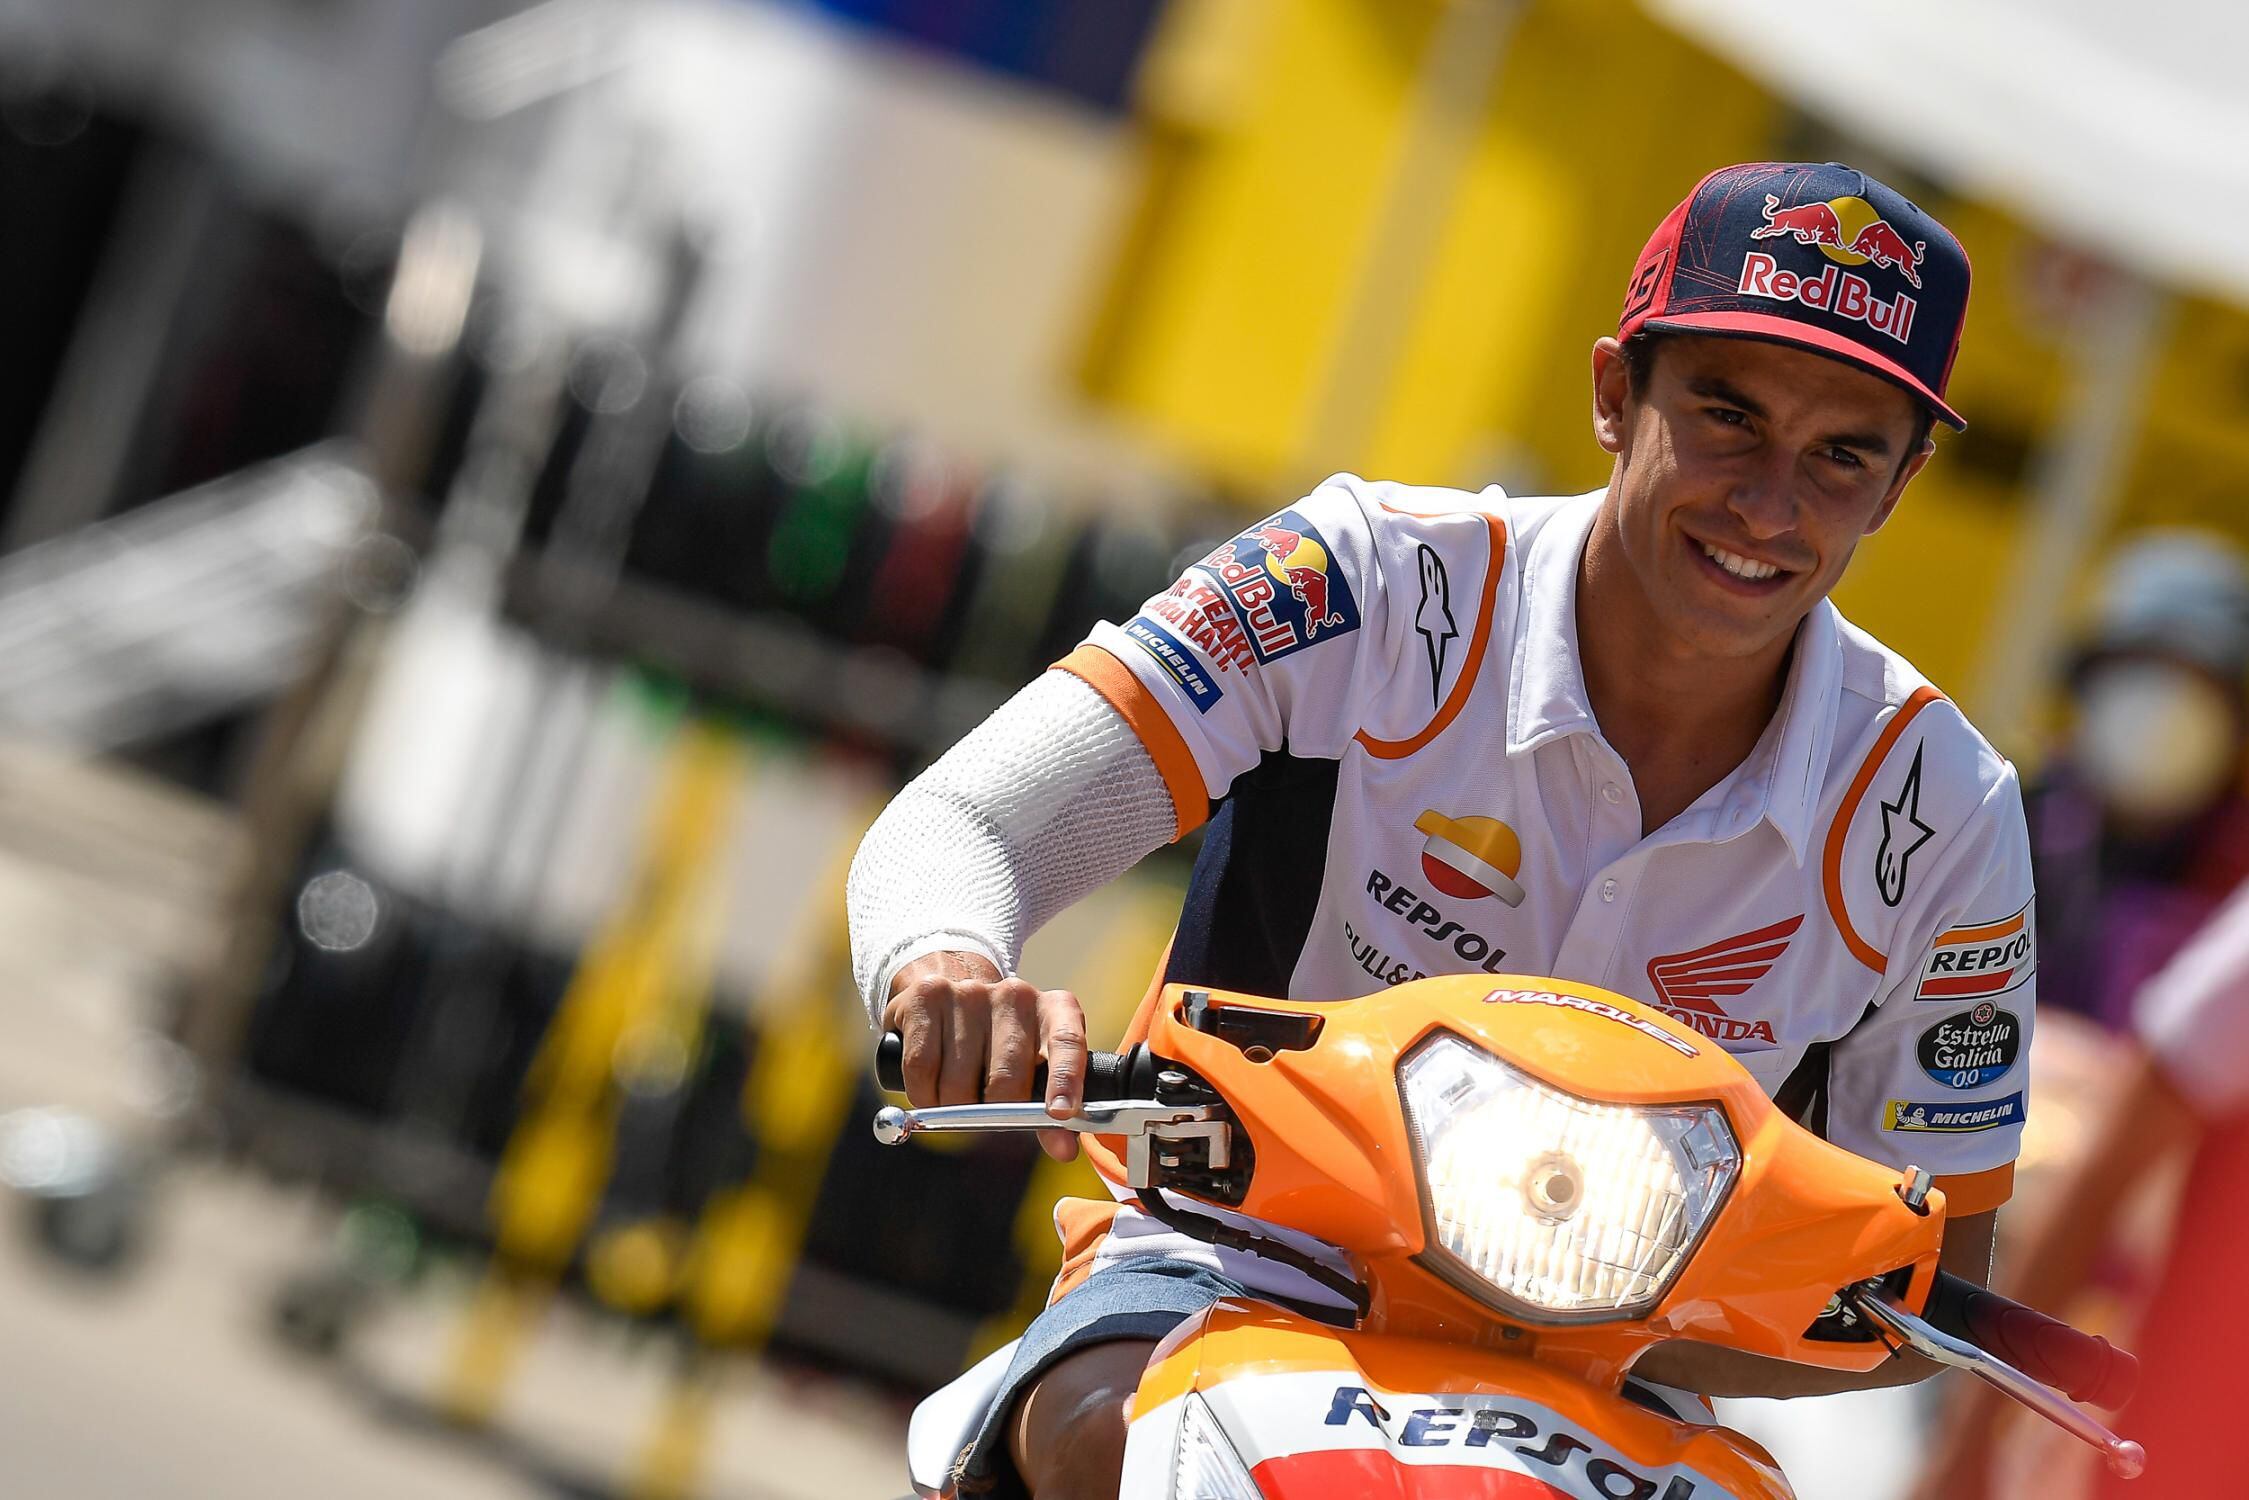 Marc Márquez has learned from his mistakes in 2020, and when he returns in 2021 he will be at 100 percent.